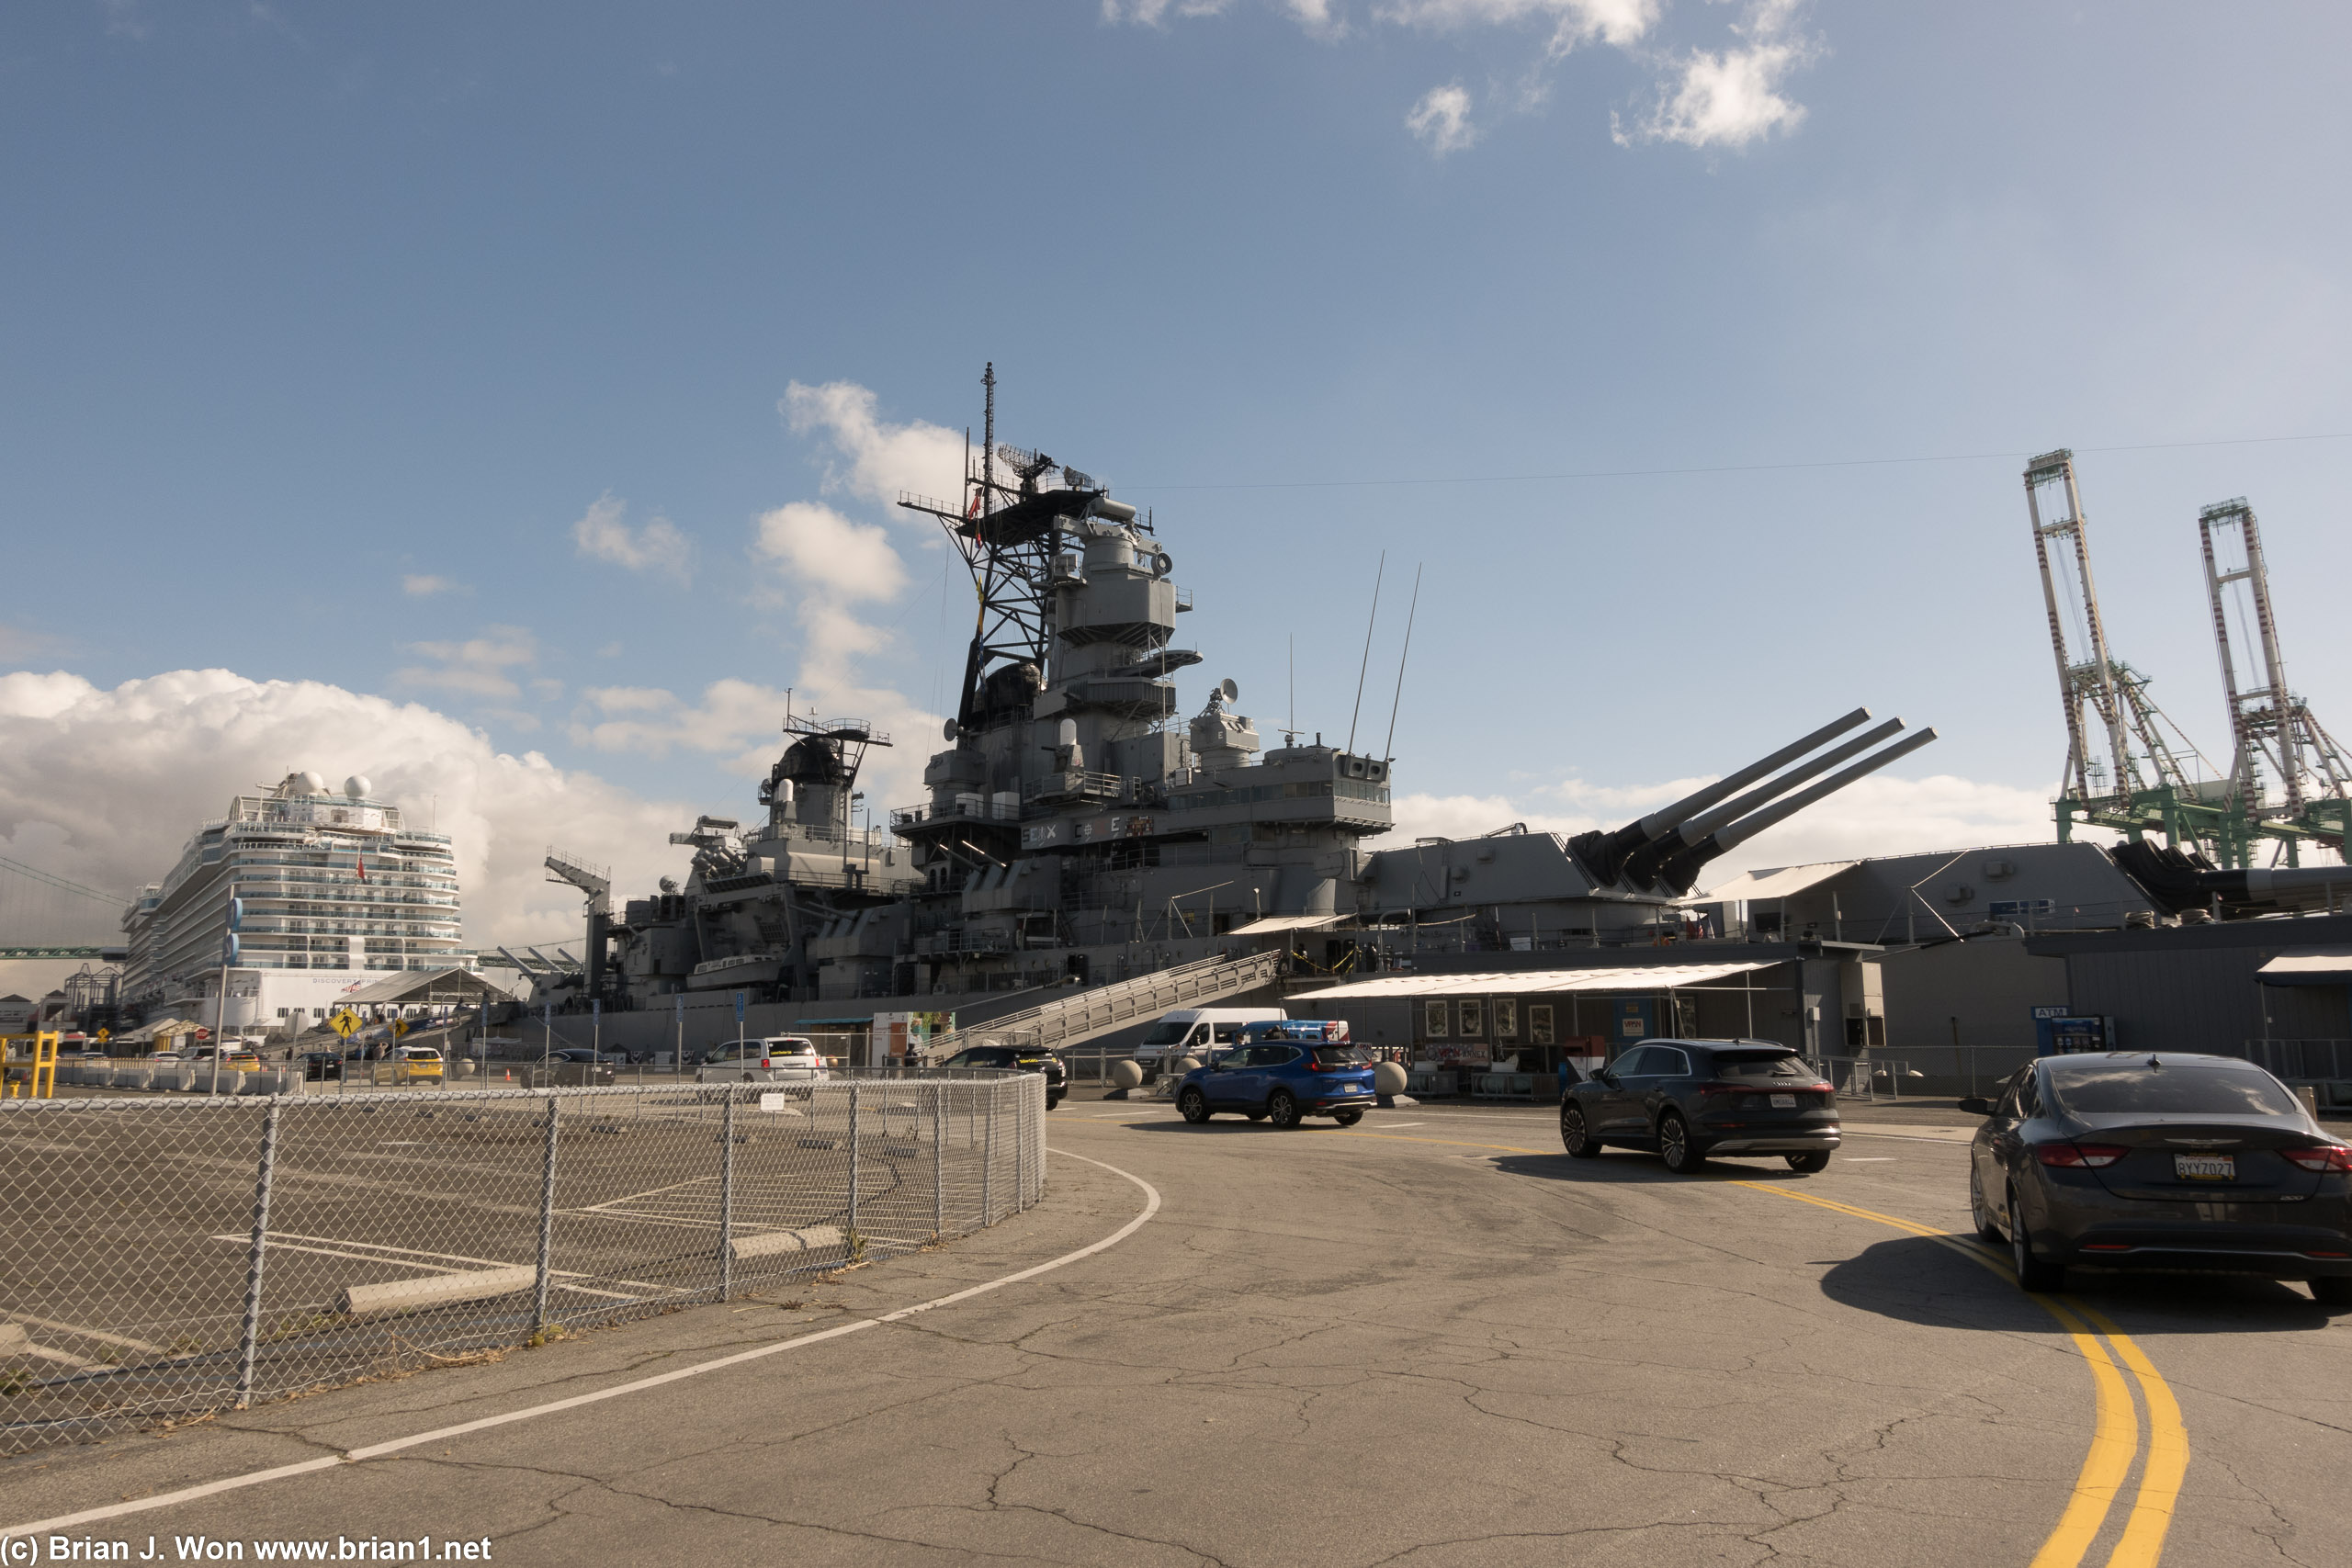 Cruise ships can be 4x or 5x the size of the USS Iowa, but they still don't compare in presence.